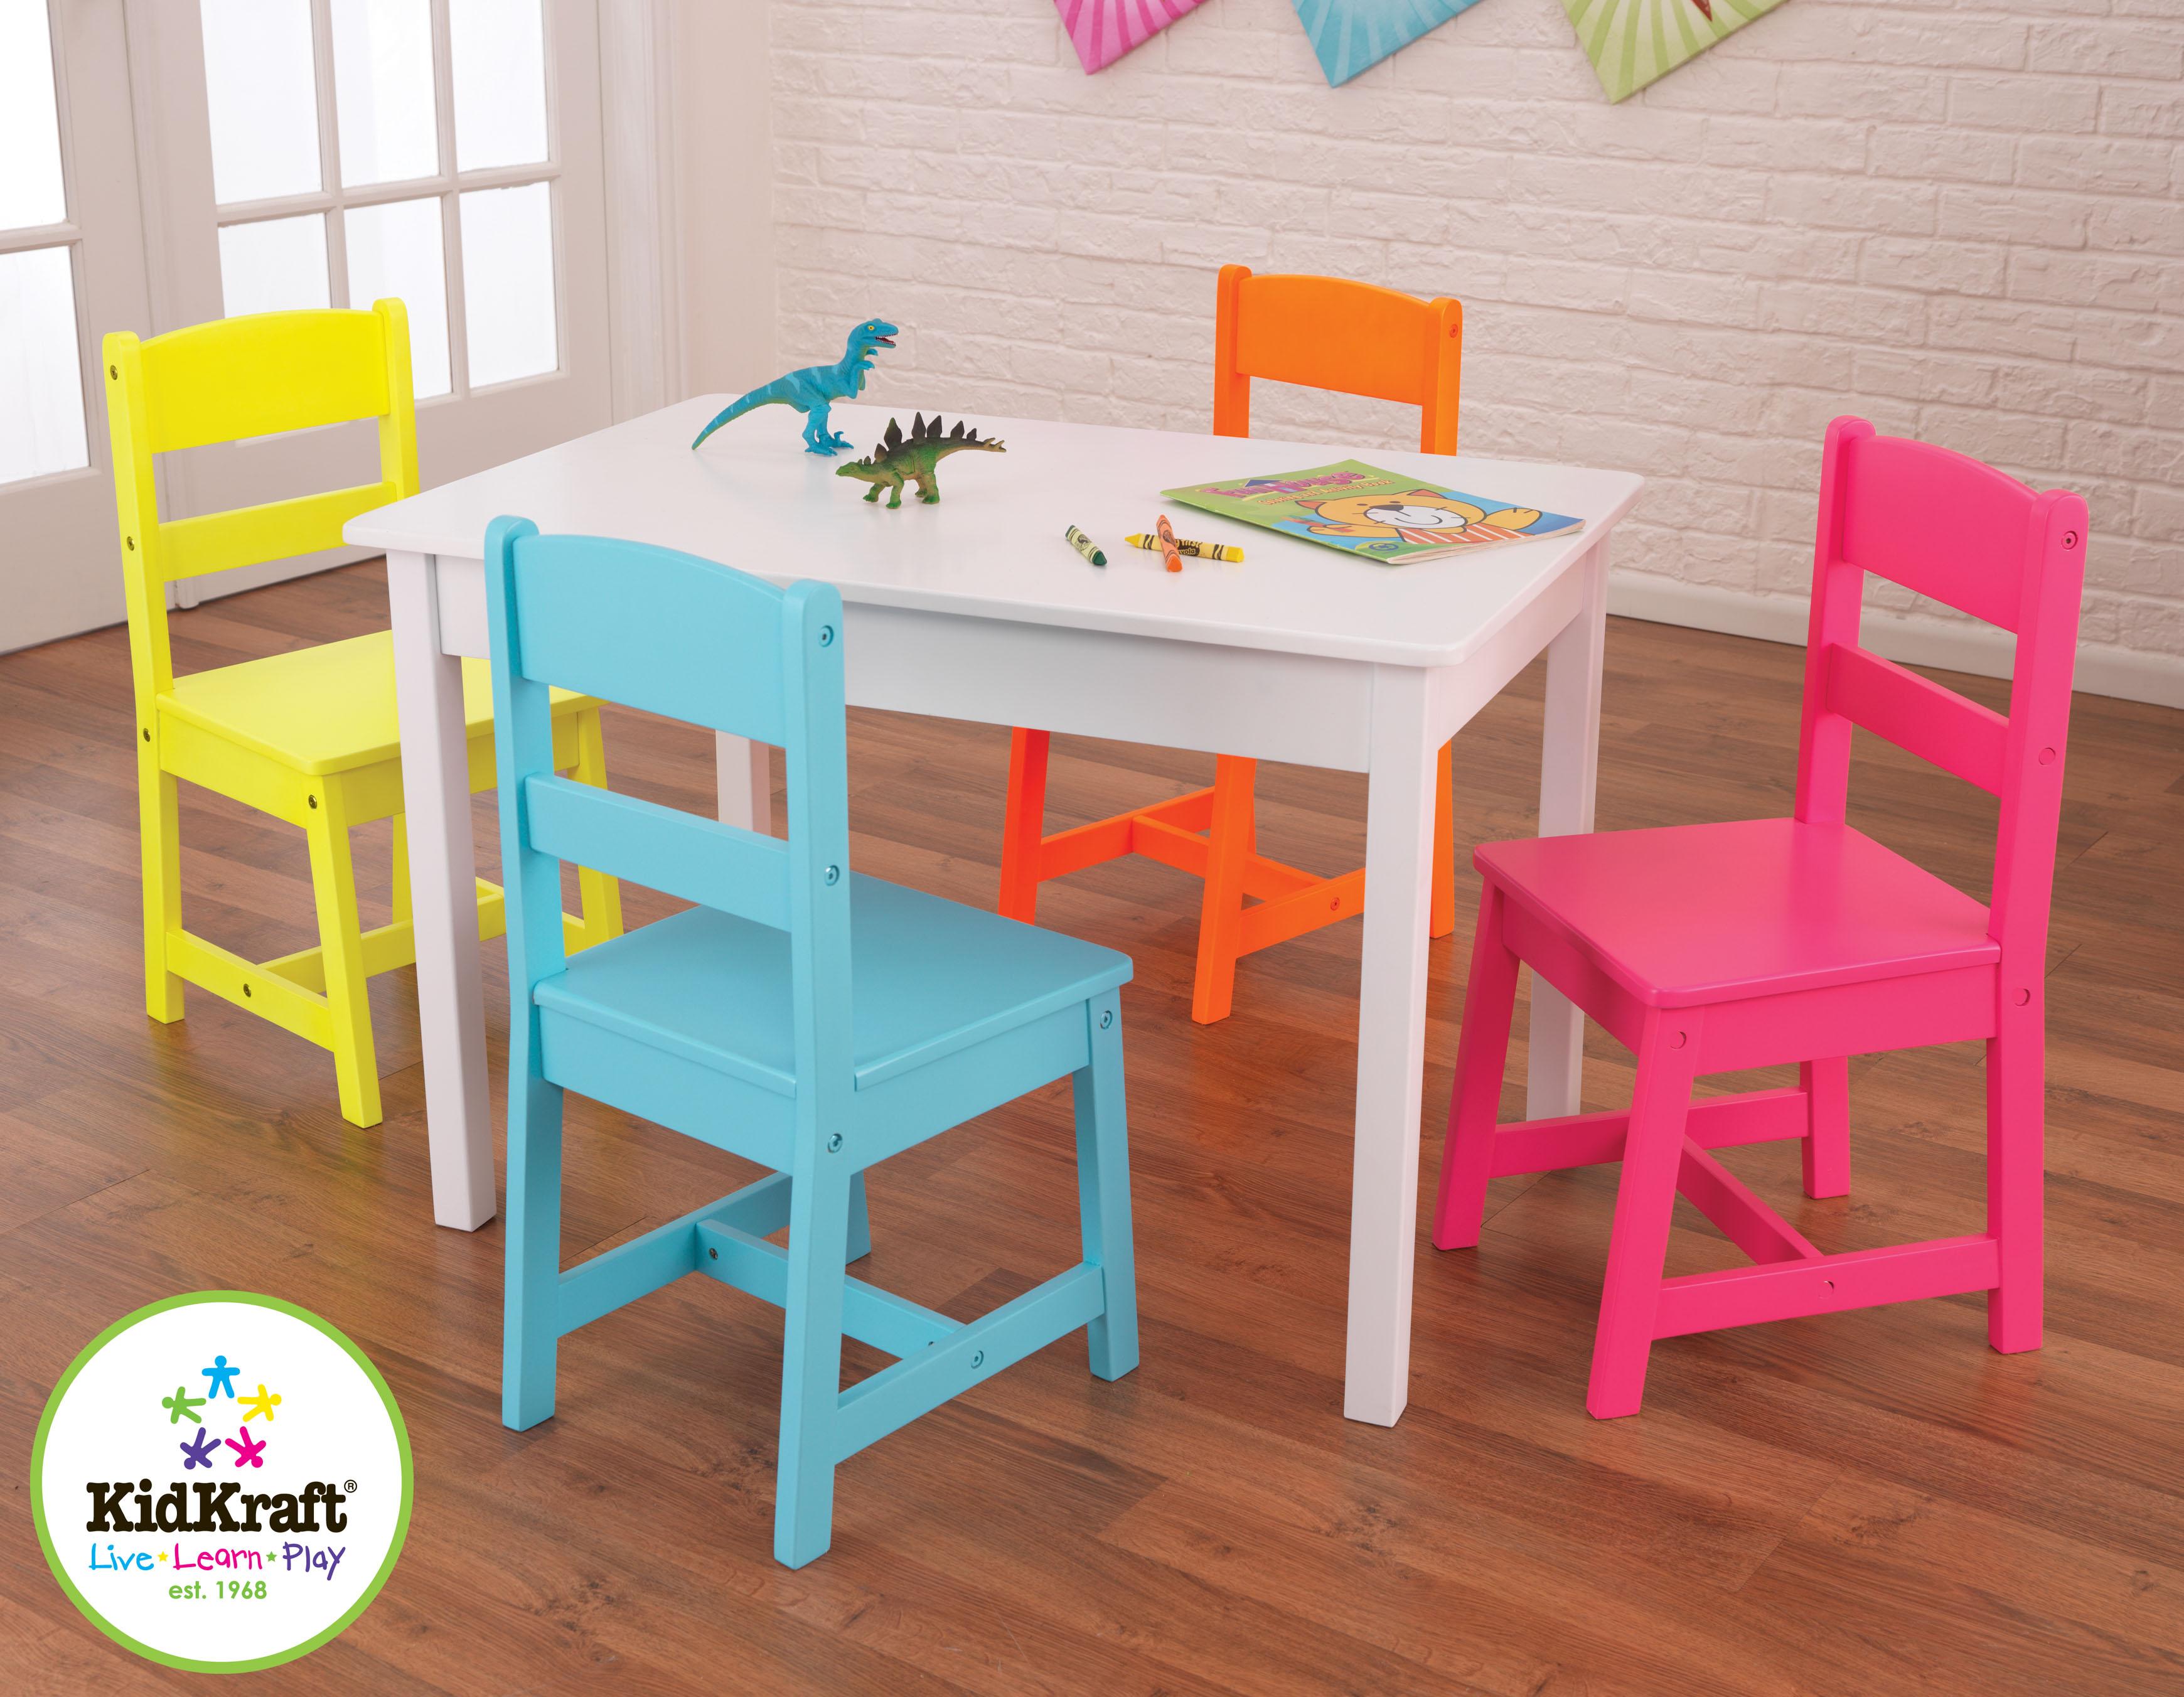 wooden table and chair set for toddlers